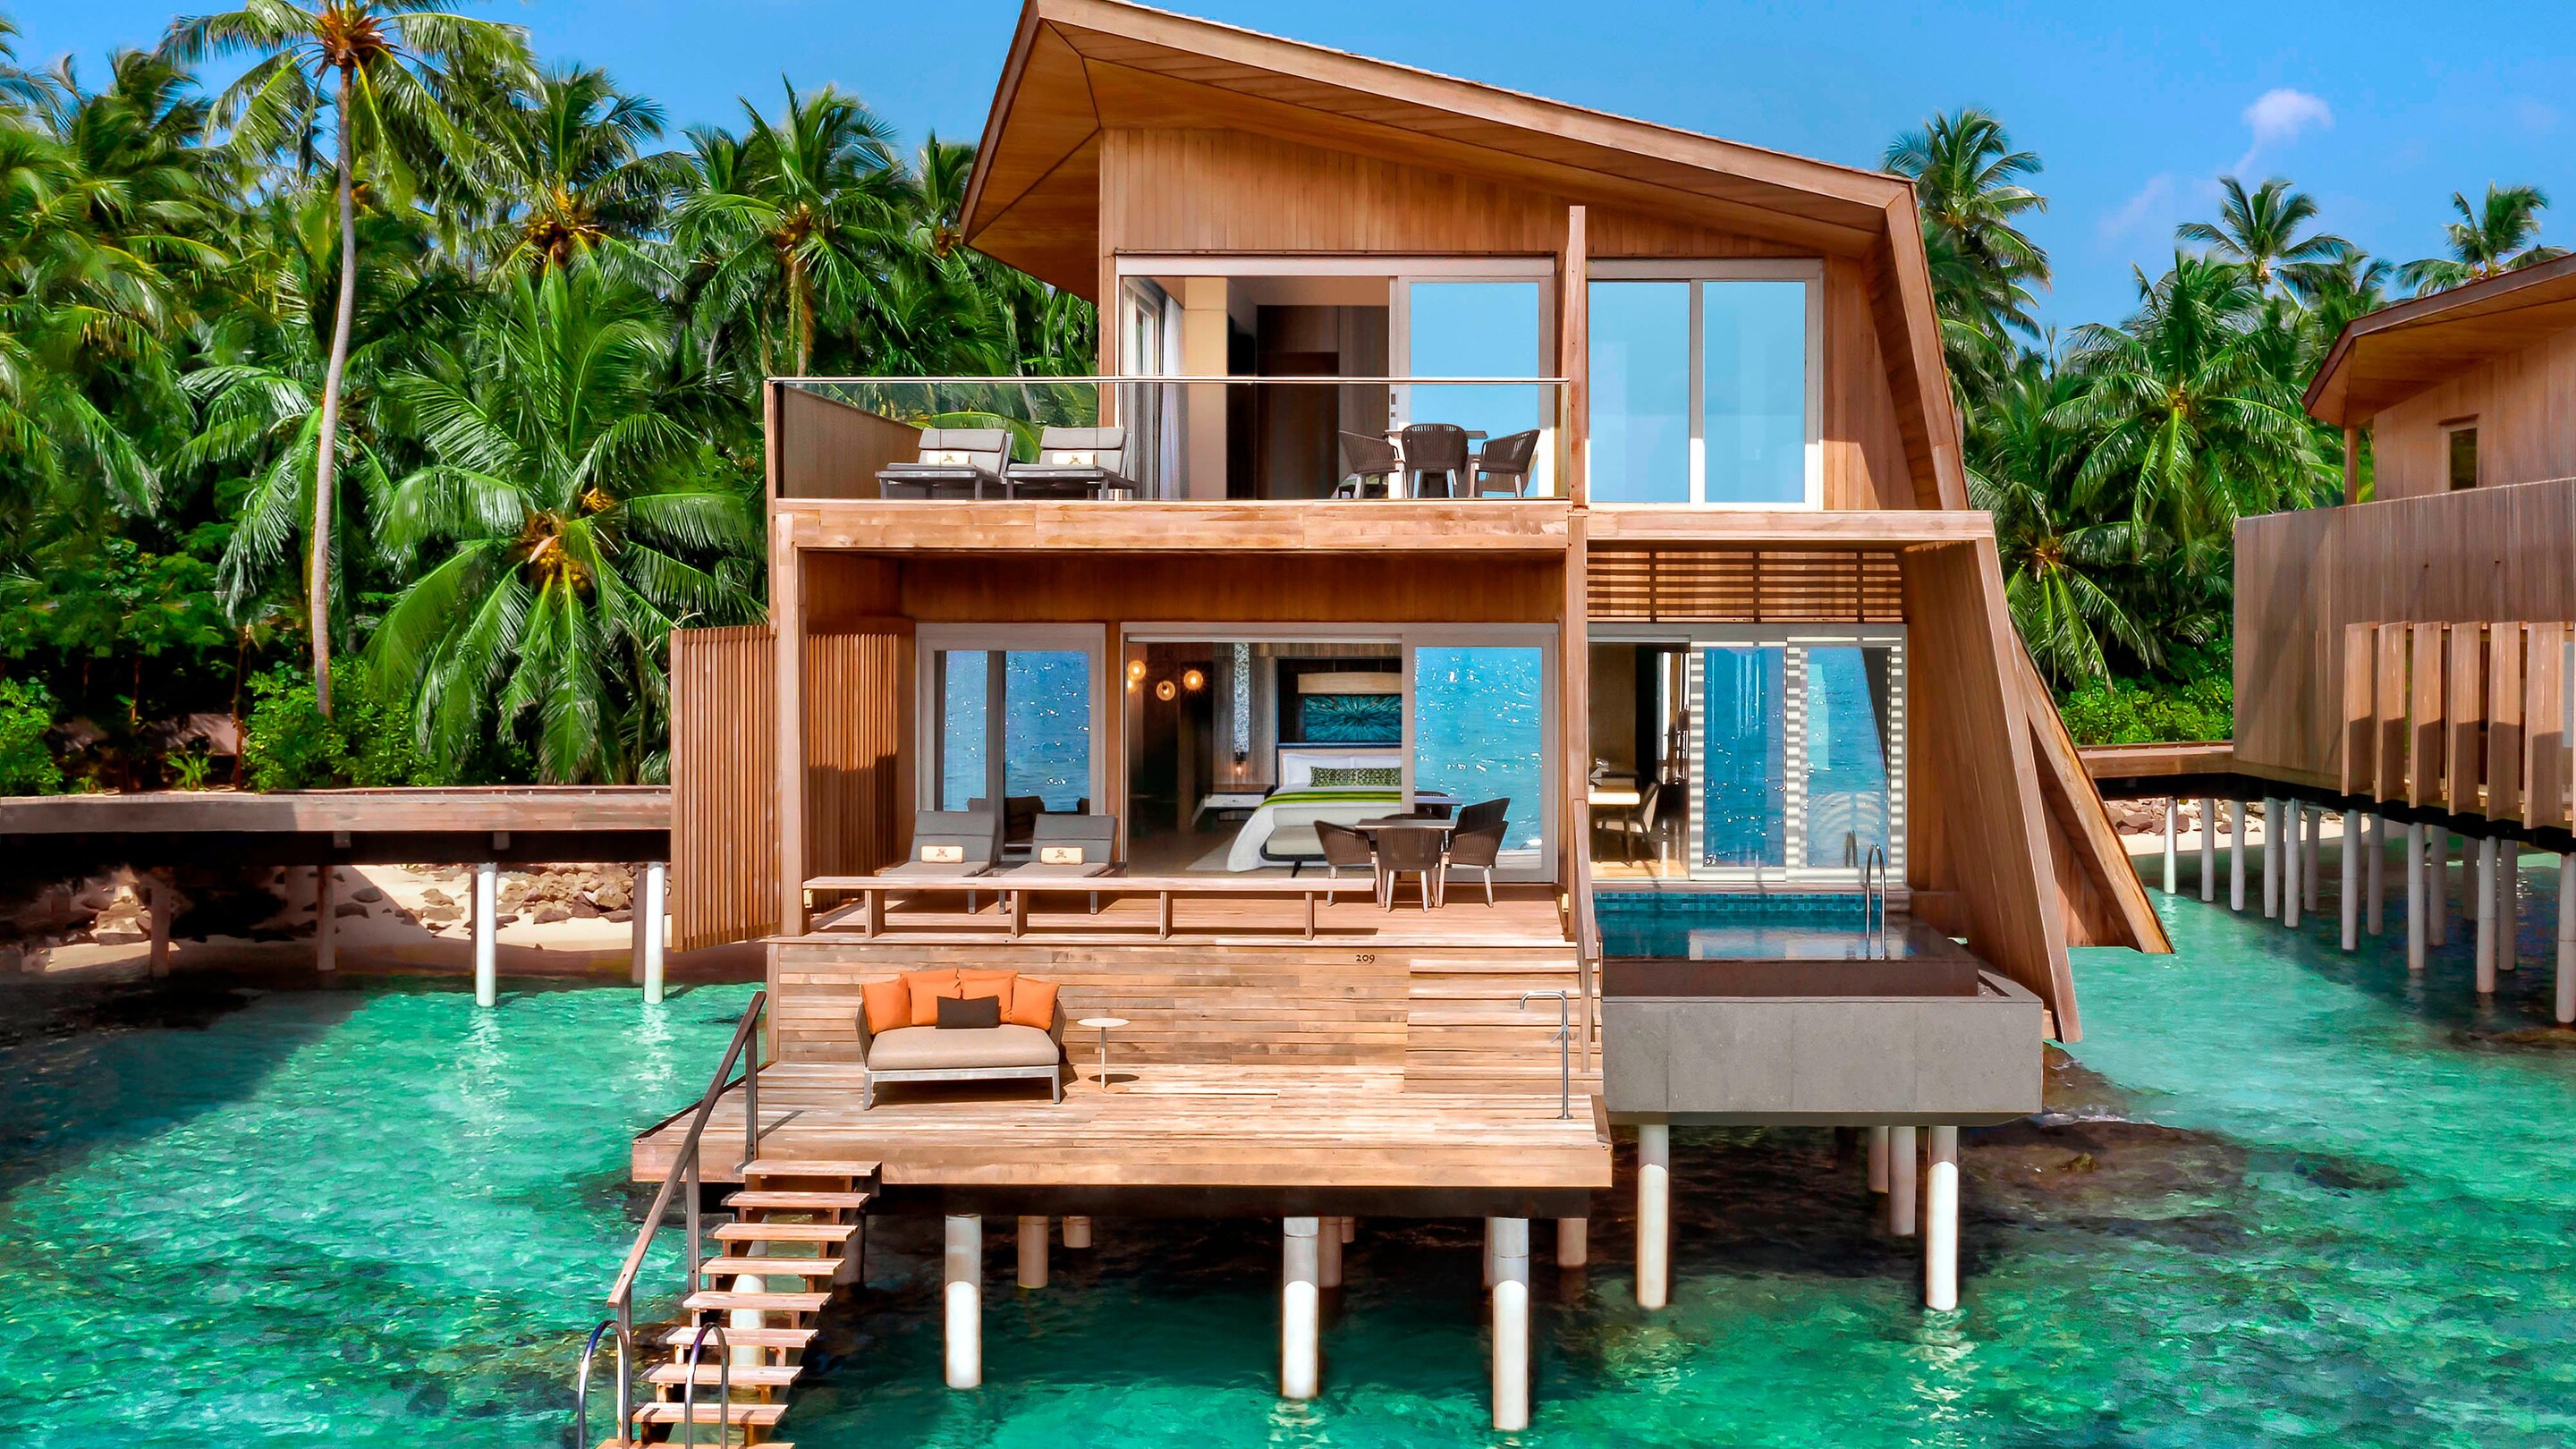 Two Story Overwater Villa with two bedrooms, full deck overlooking the ocean